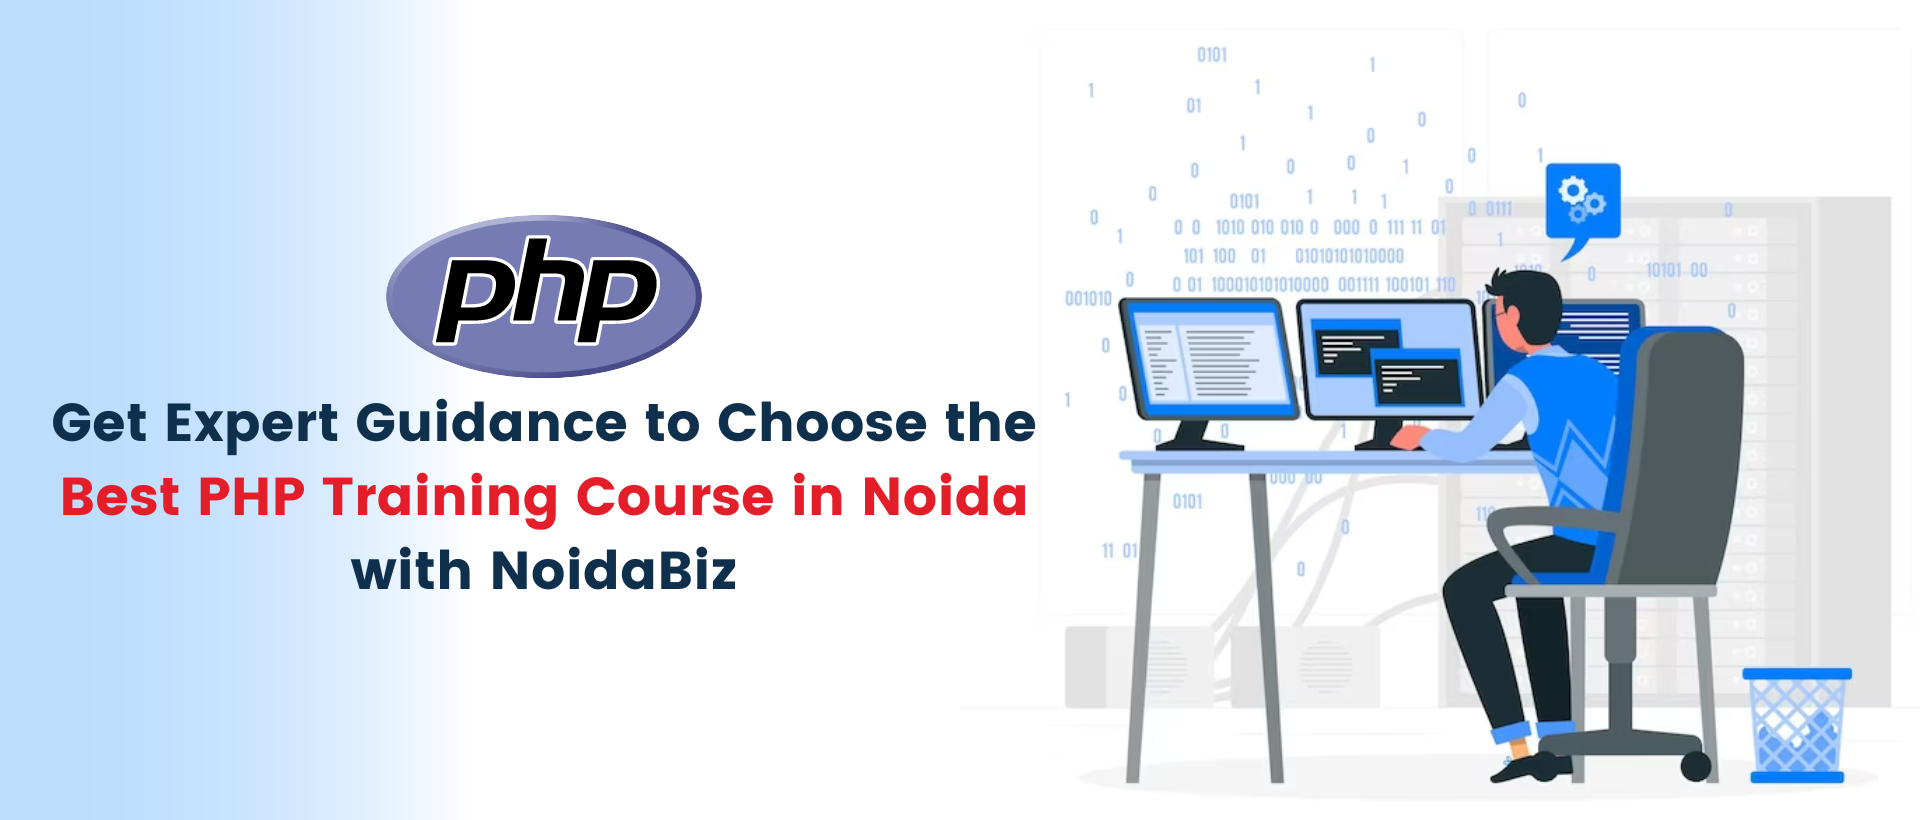 Get expert guidance to choose the best php training course in noida with noidabiz